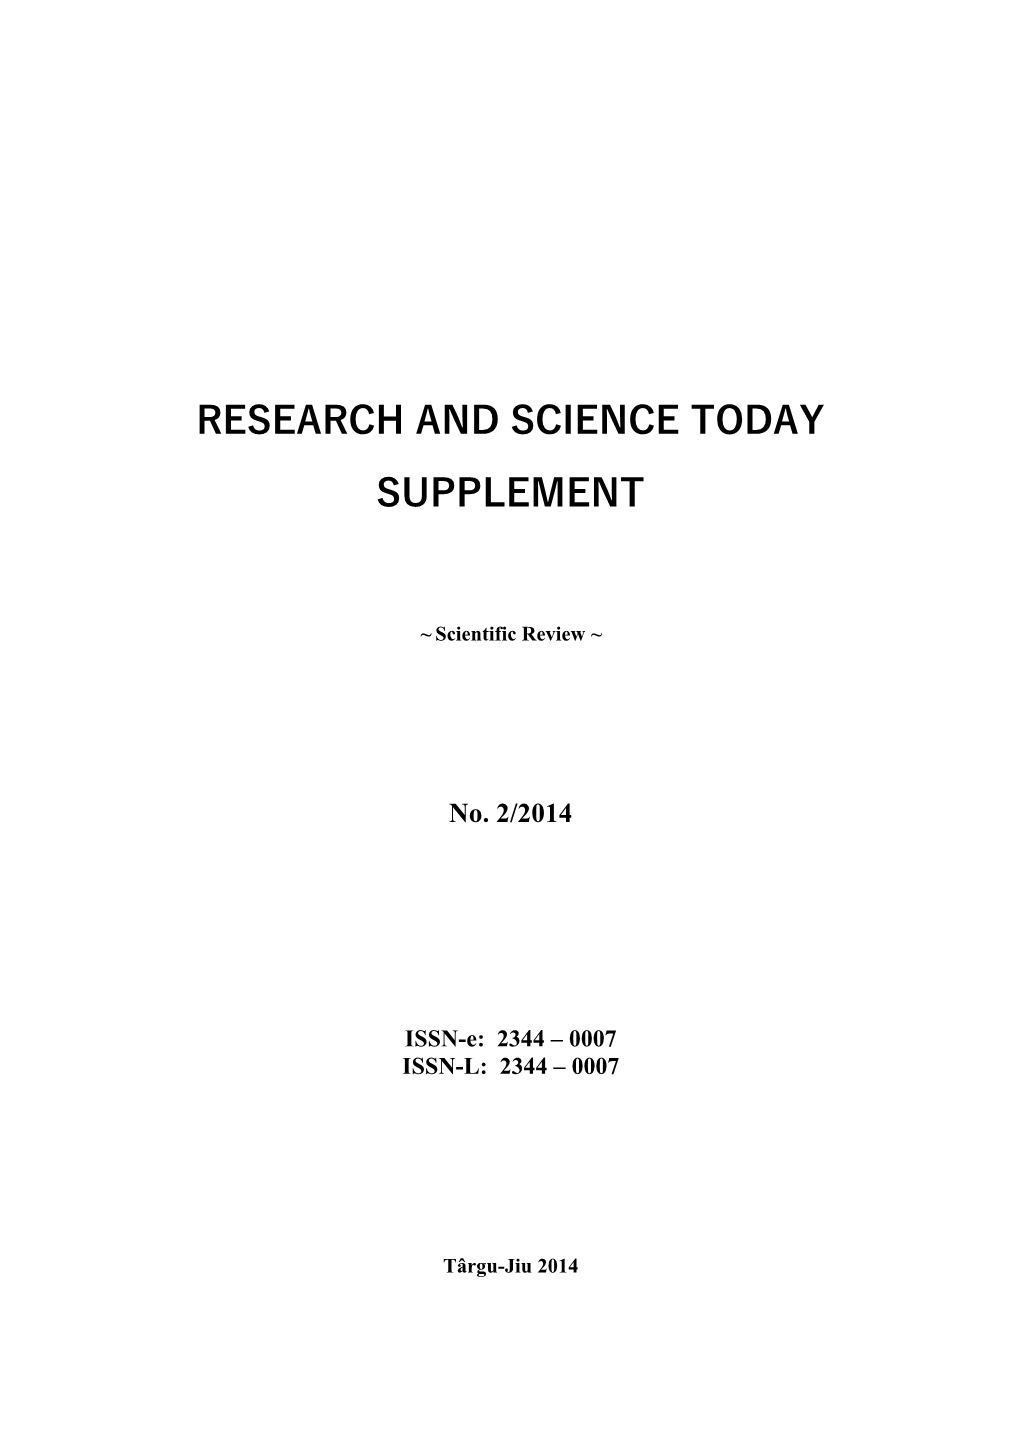 Research and Science Today Supplement 2/2014